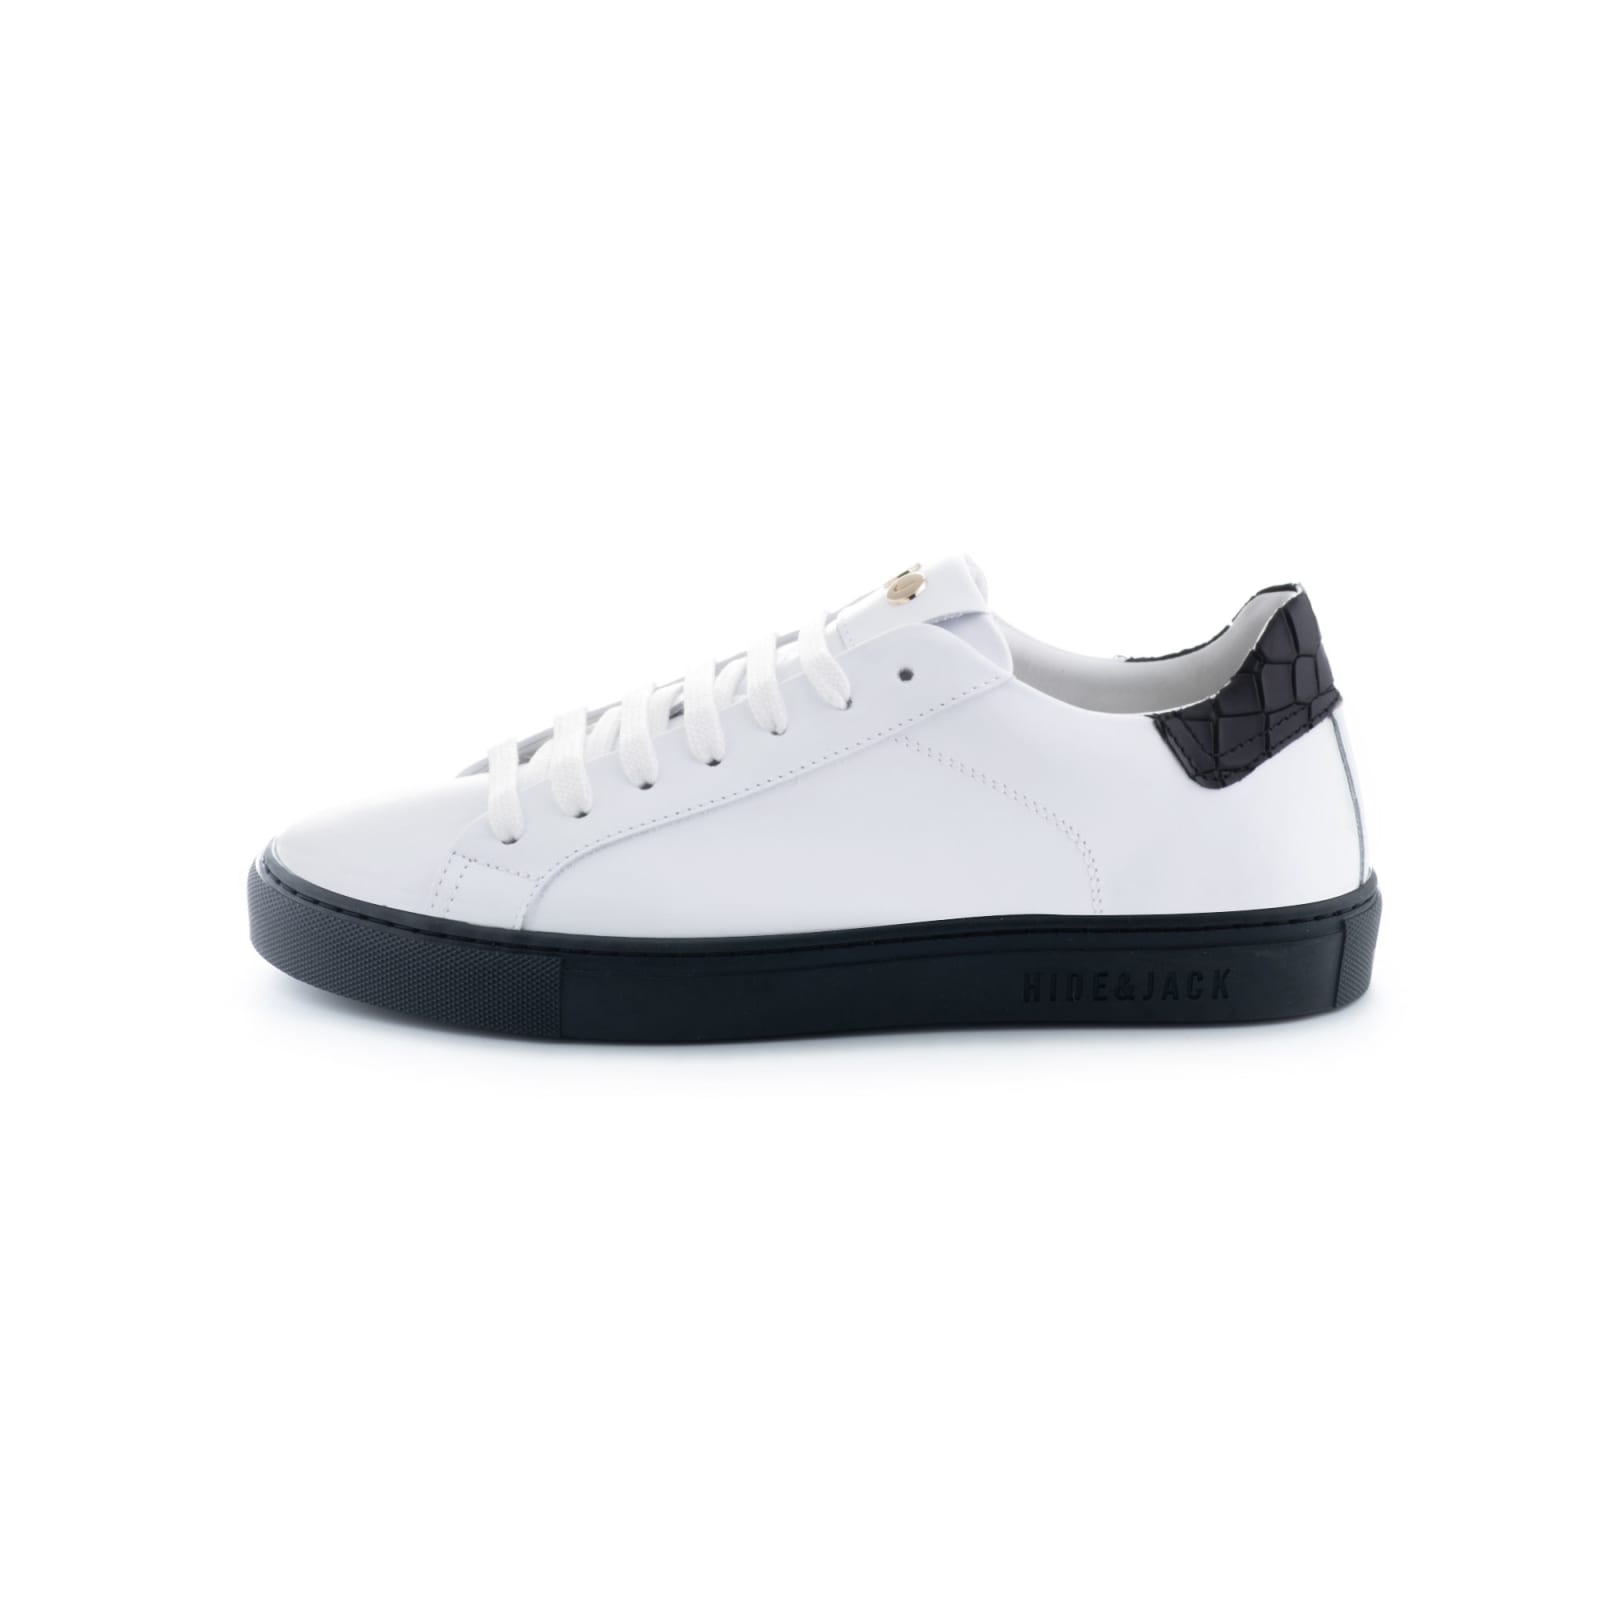 Hide & Jack Sky Leather White And Spolier In Croco Printed Black And Black Sole